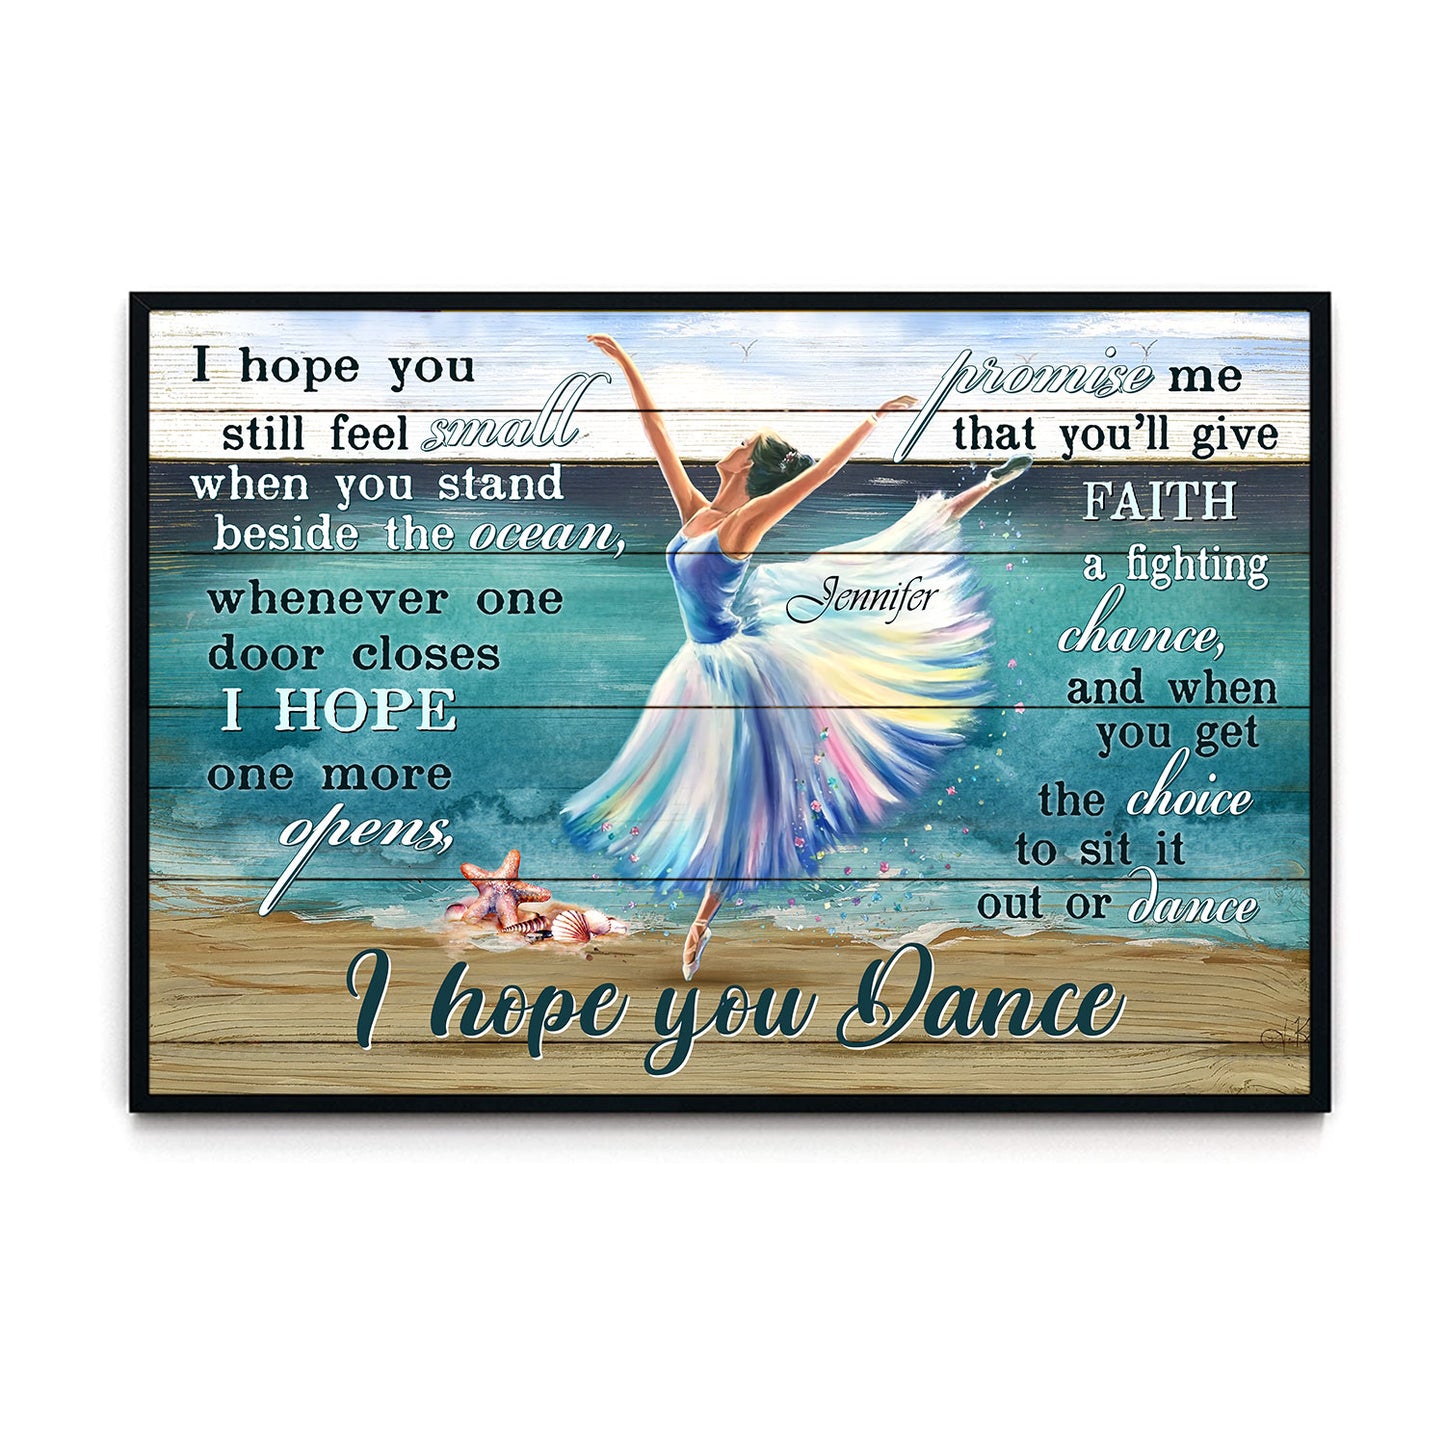 I Hope You Still Feel Small When You Stand Beside The Ocean Poster